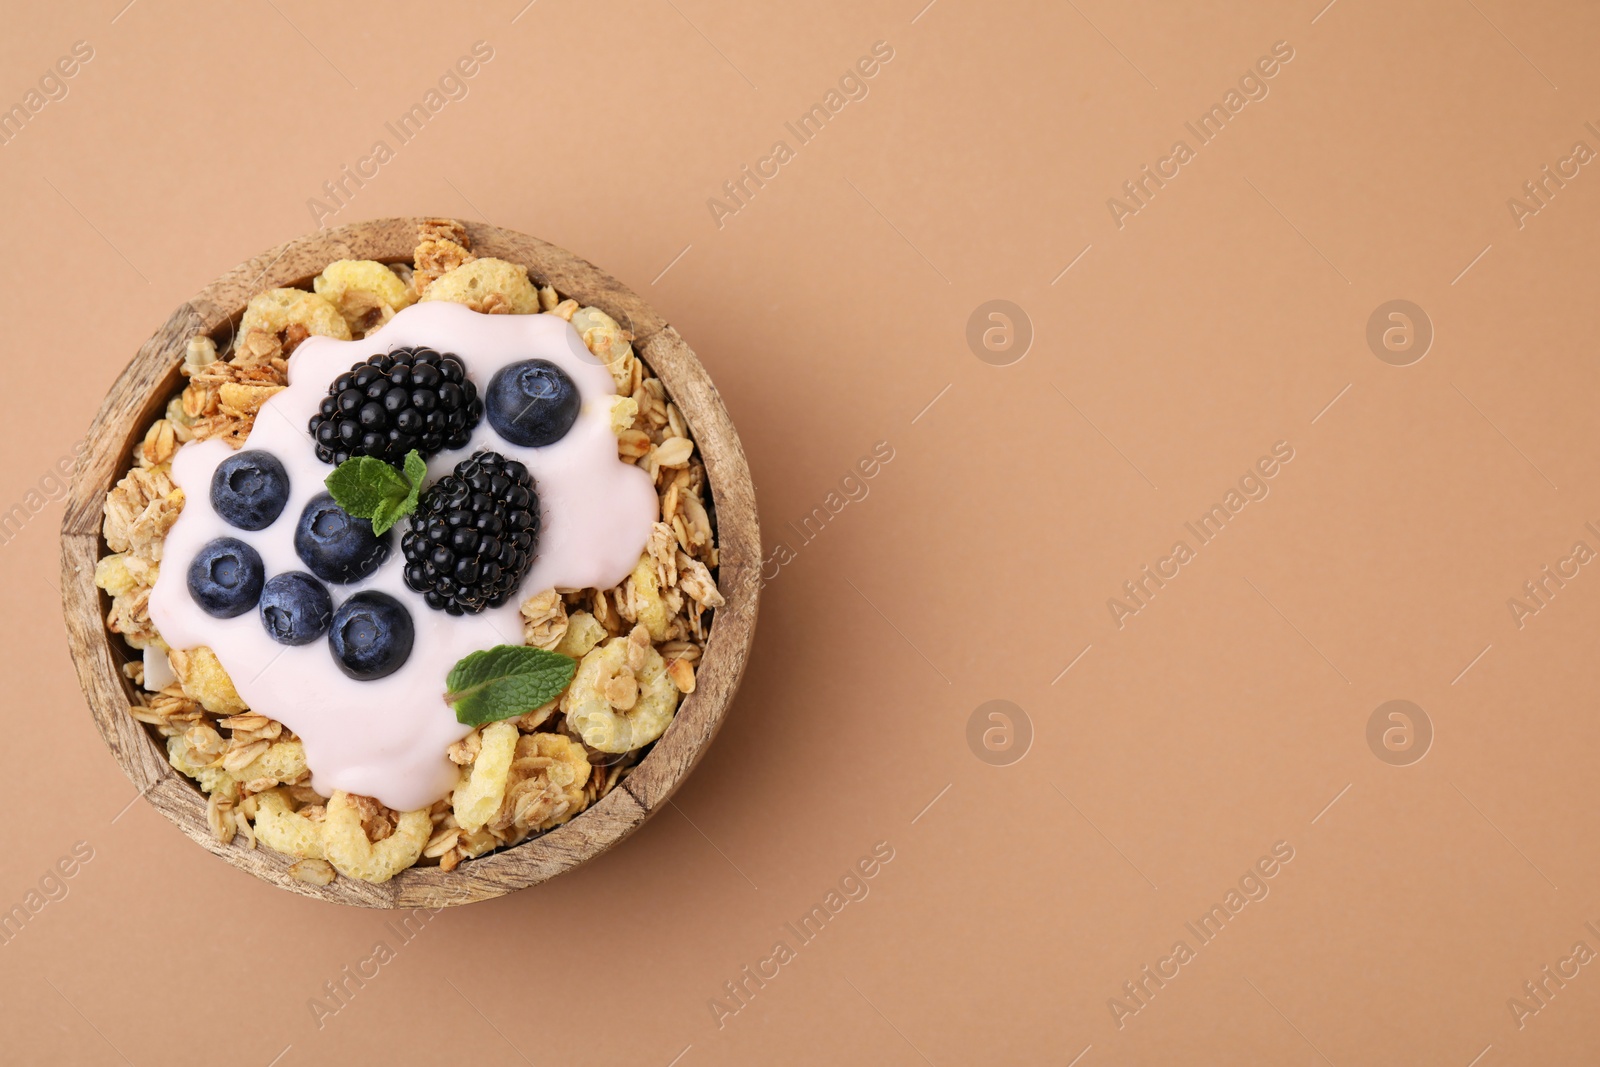 Photo of Tasty granola, yogurt and fresh berries in bowl on pale brown background, top view with space for text. Healthy breakfast